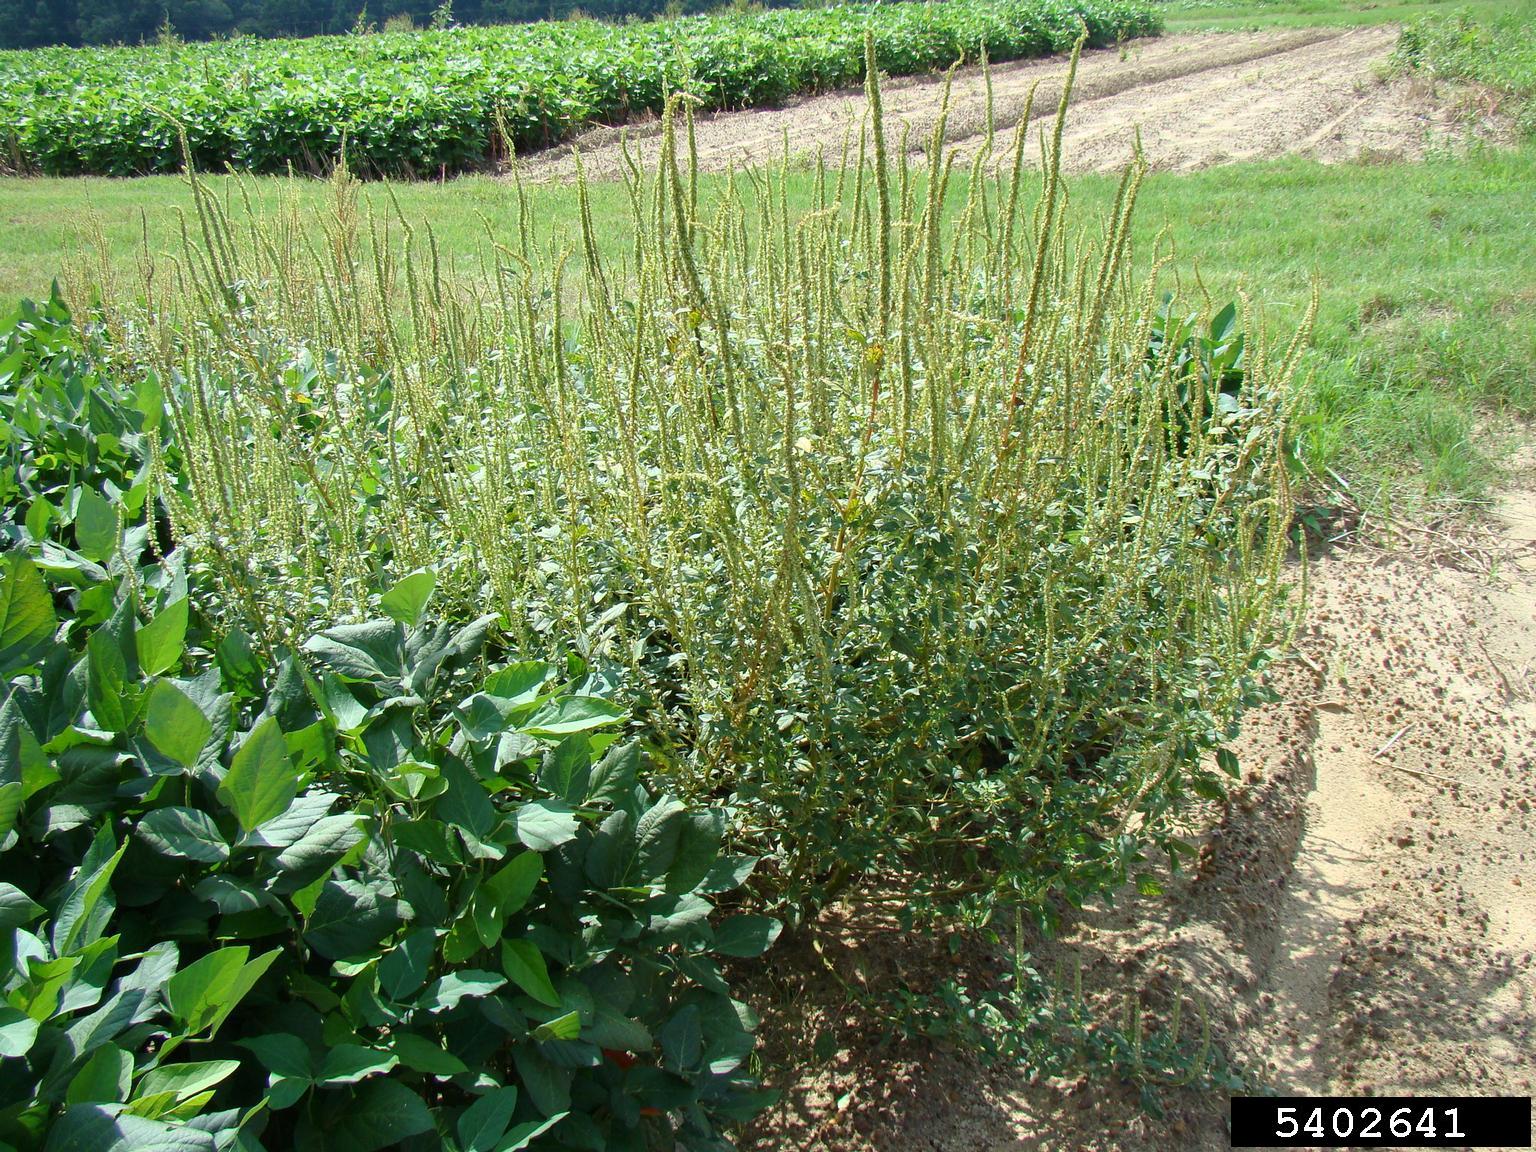 Photograph of palmer pigweed on the edge of a field of soybean. The photo shows a clump of spindly herbaceous plants with long, green inflorescences at the corner of a cultivated field of soybeans. The soybeans are shorter than the weeks and have much larger, darker green leaves.